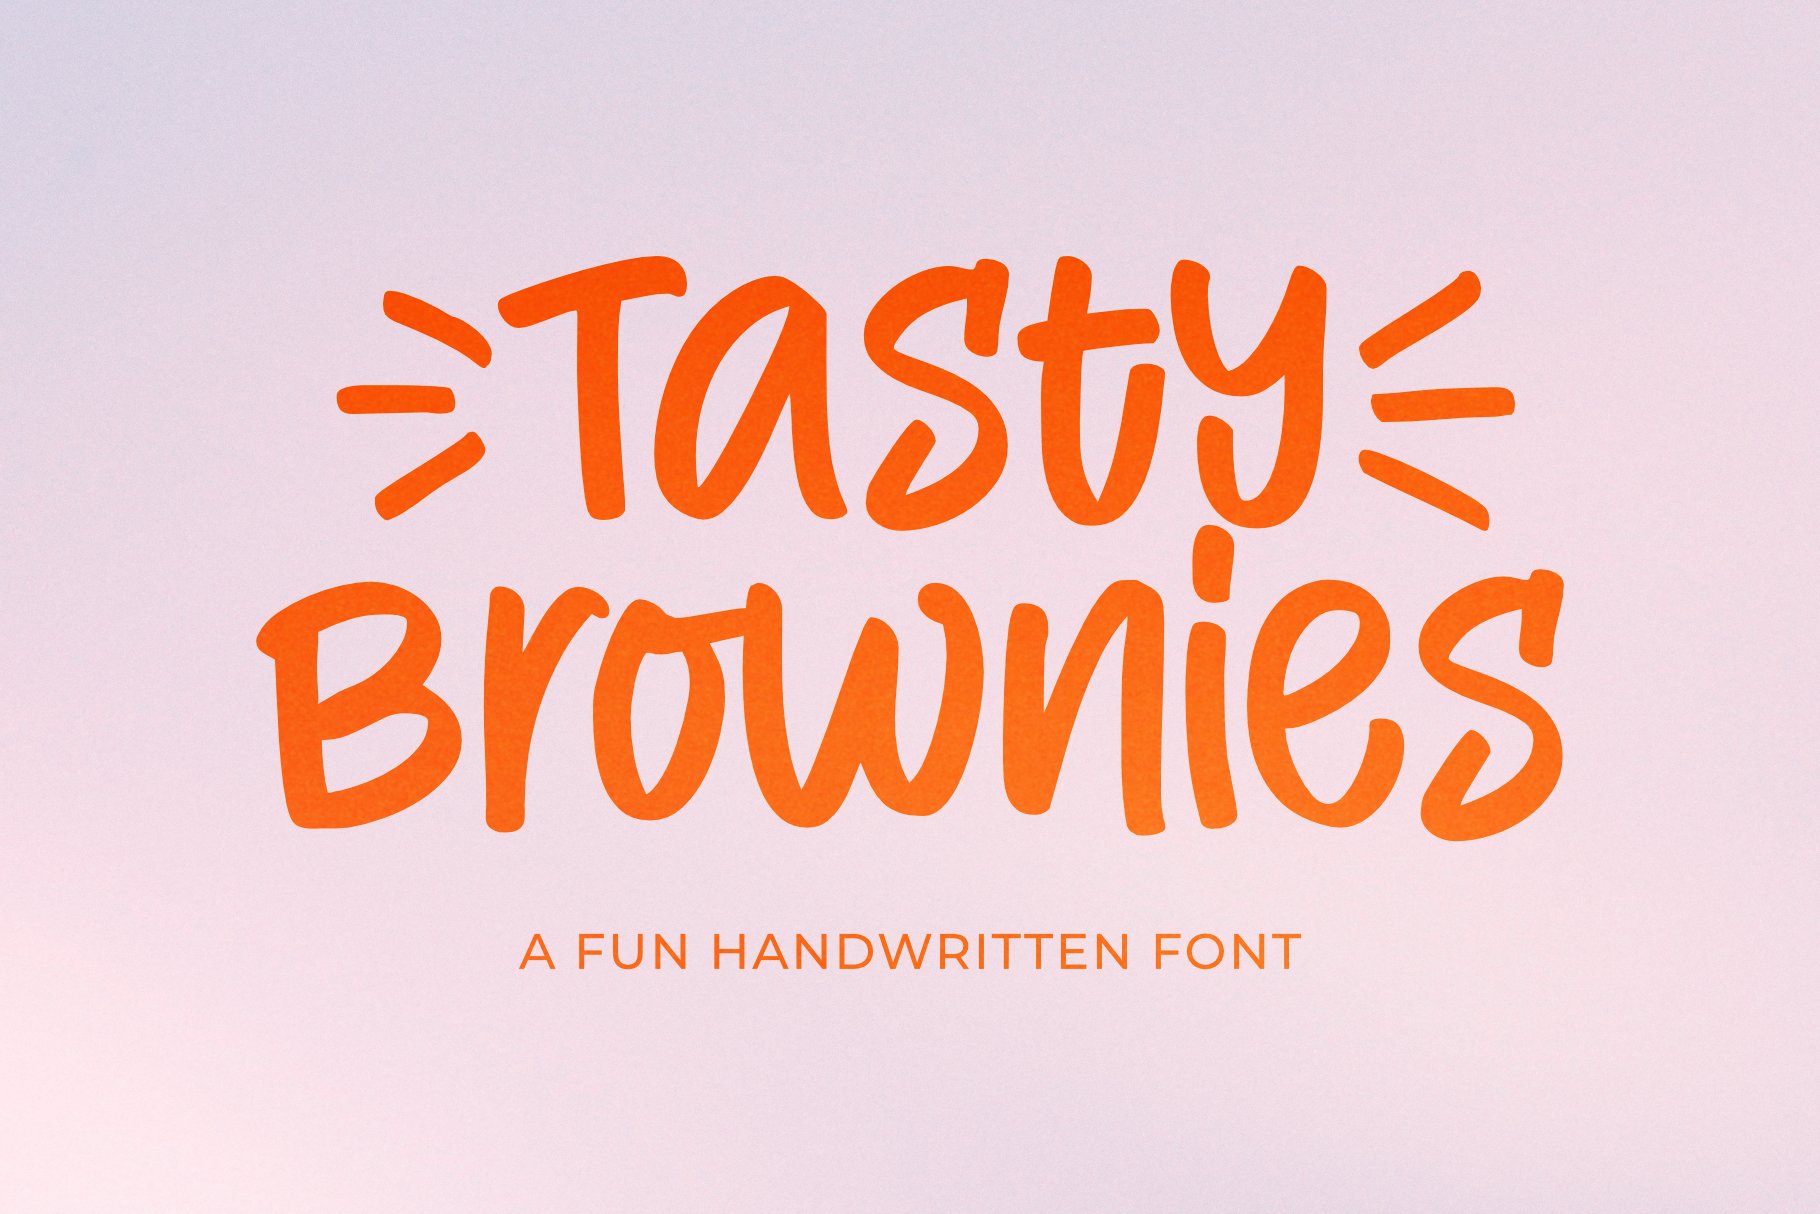 Tasty Brownies - a Fun Font cover image.